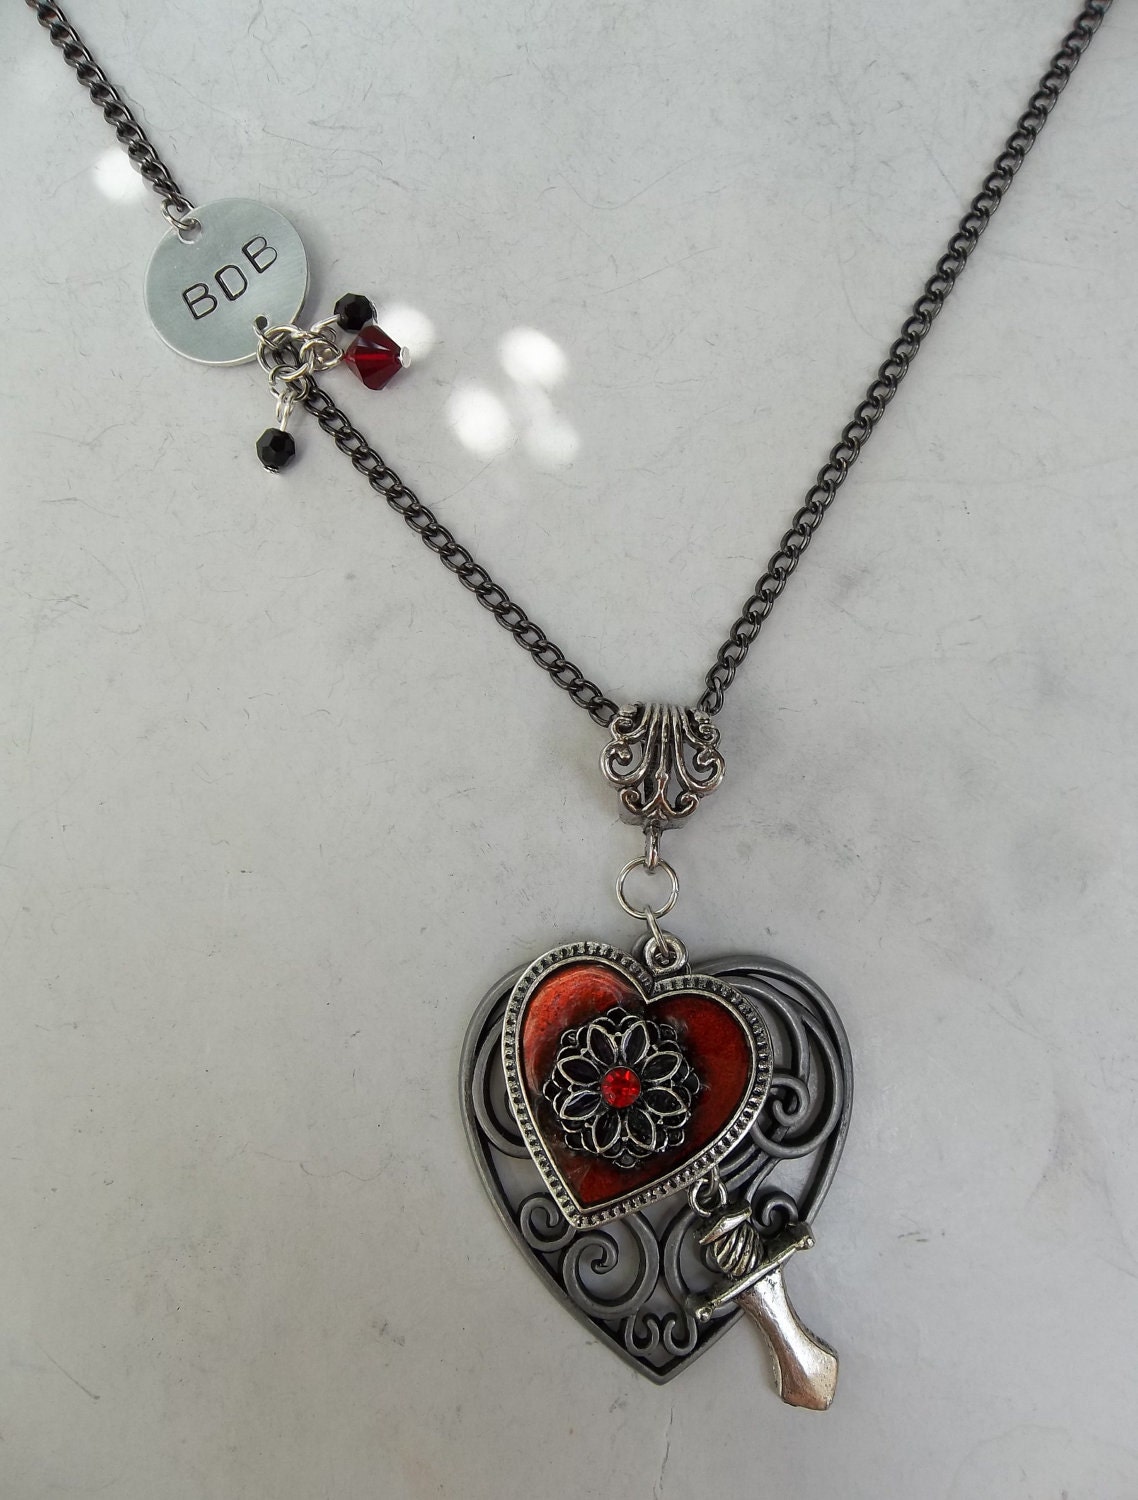 Black Dagger Brotherhood Long Charm Necklace Hand Stamped with Dagger and Swarovski Crystals BDB